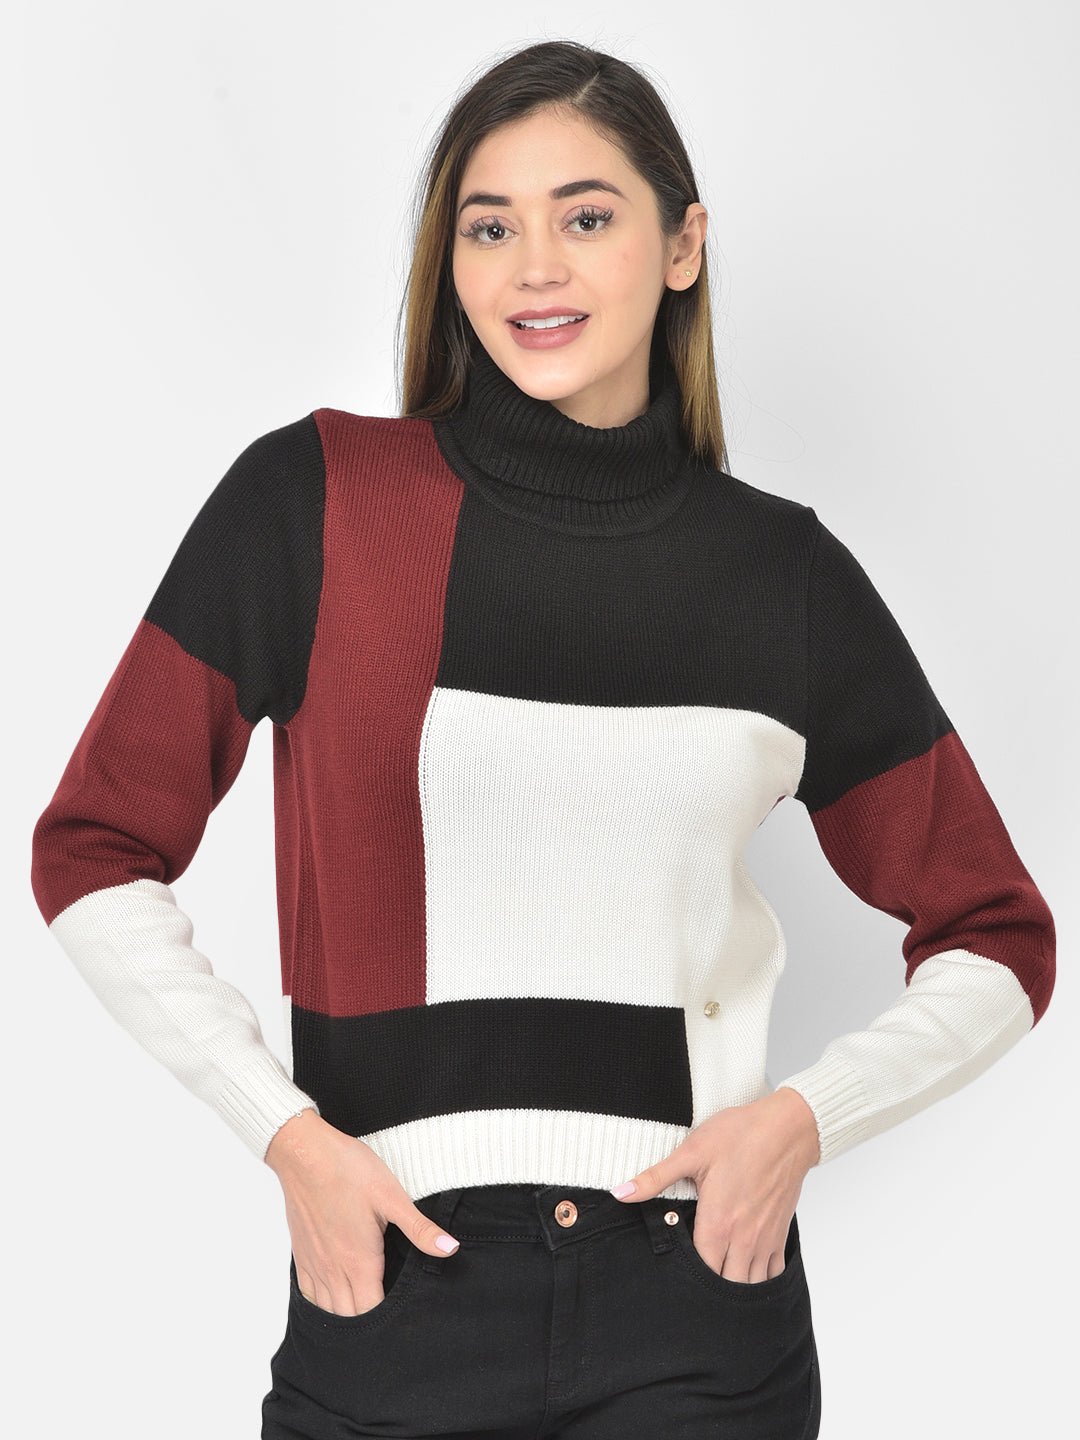 Full Sleeve Pullover Sweater top